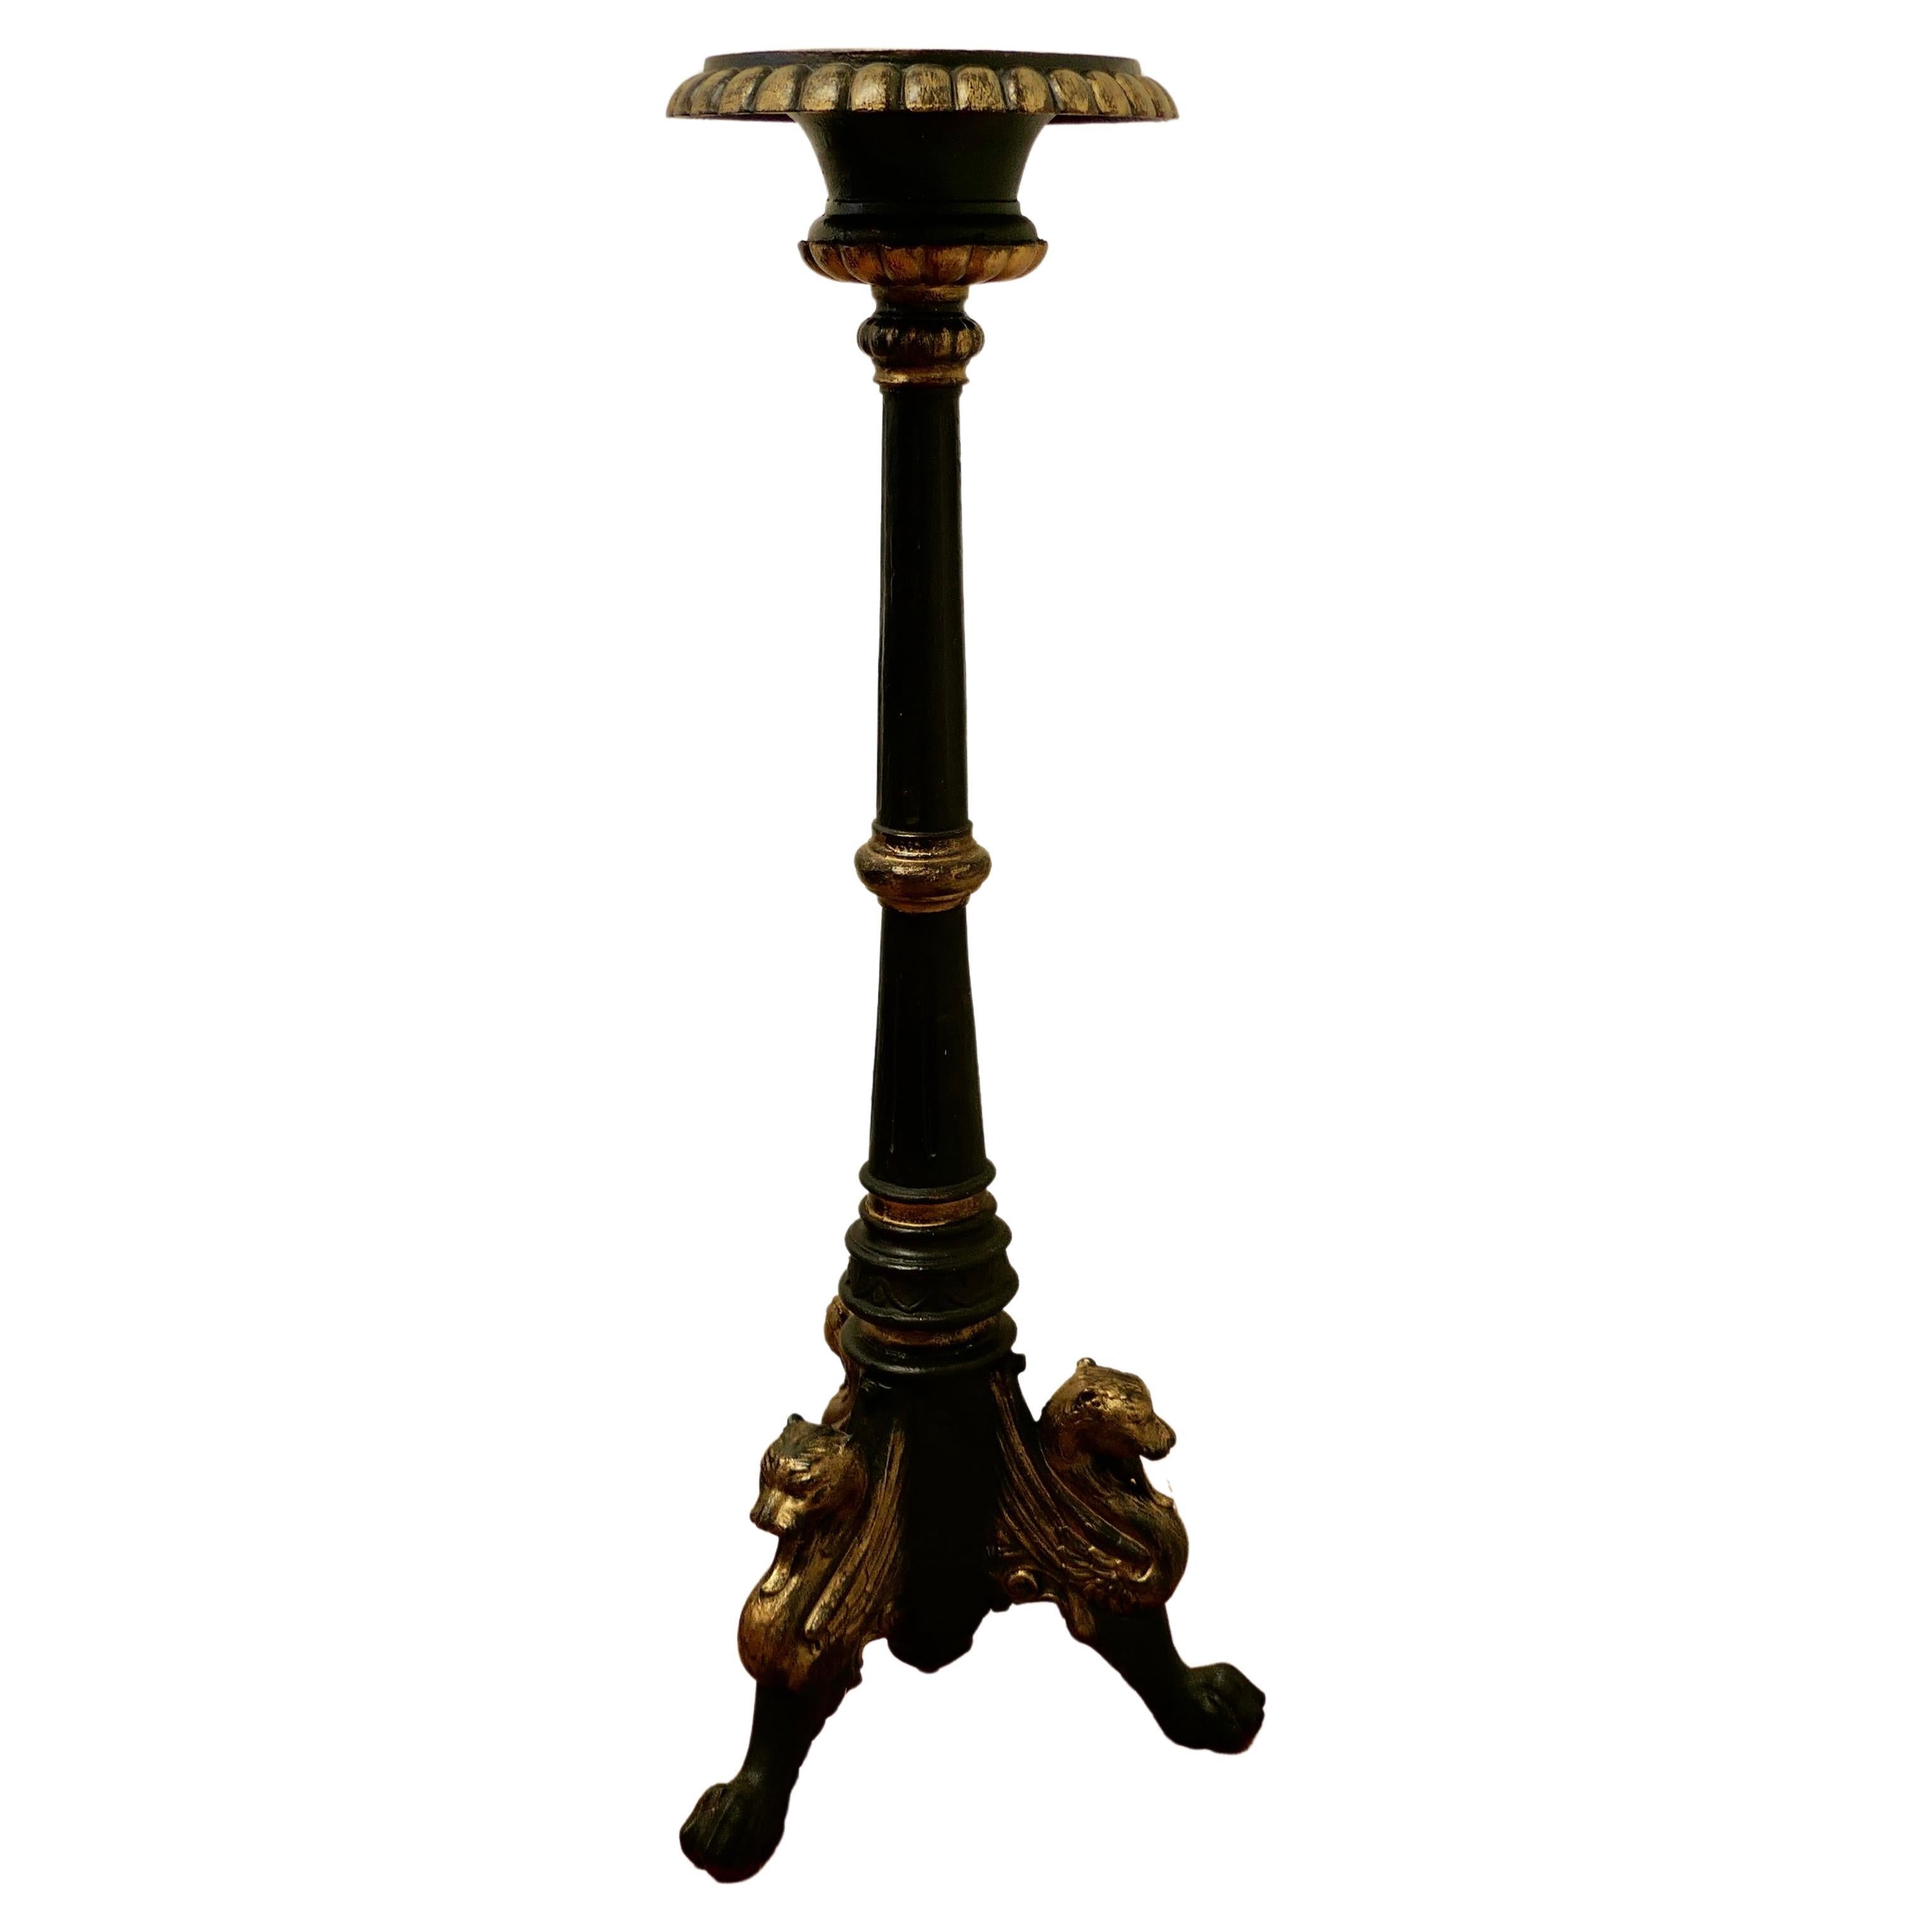 Tall Arts & Crafts Cast Iron Candle Stick or Torchère